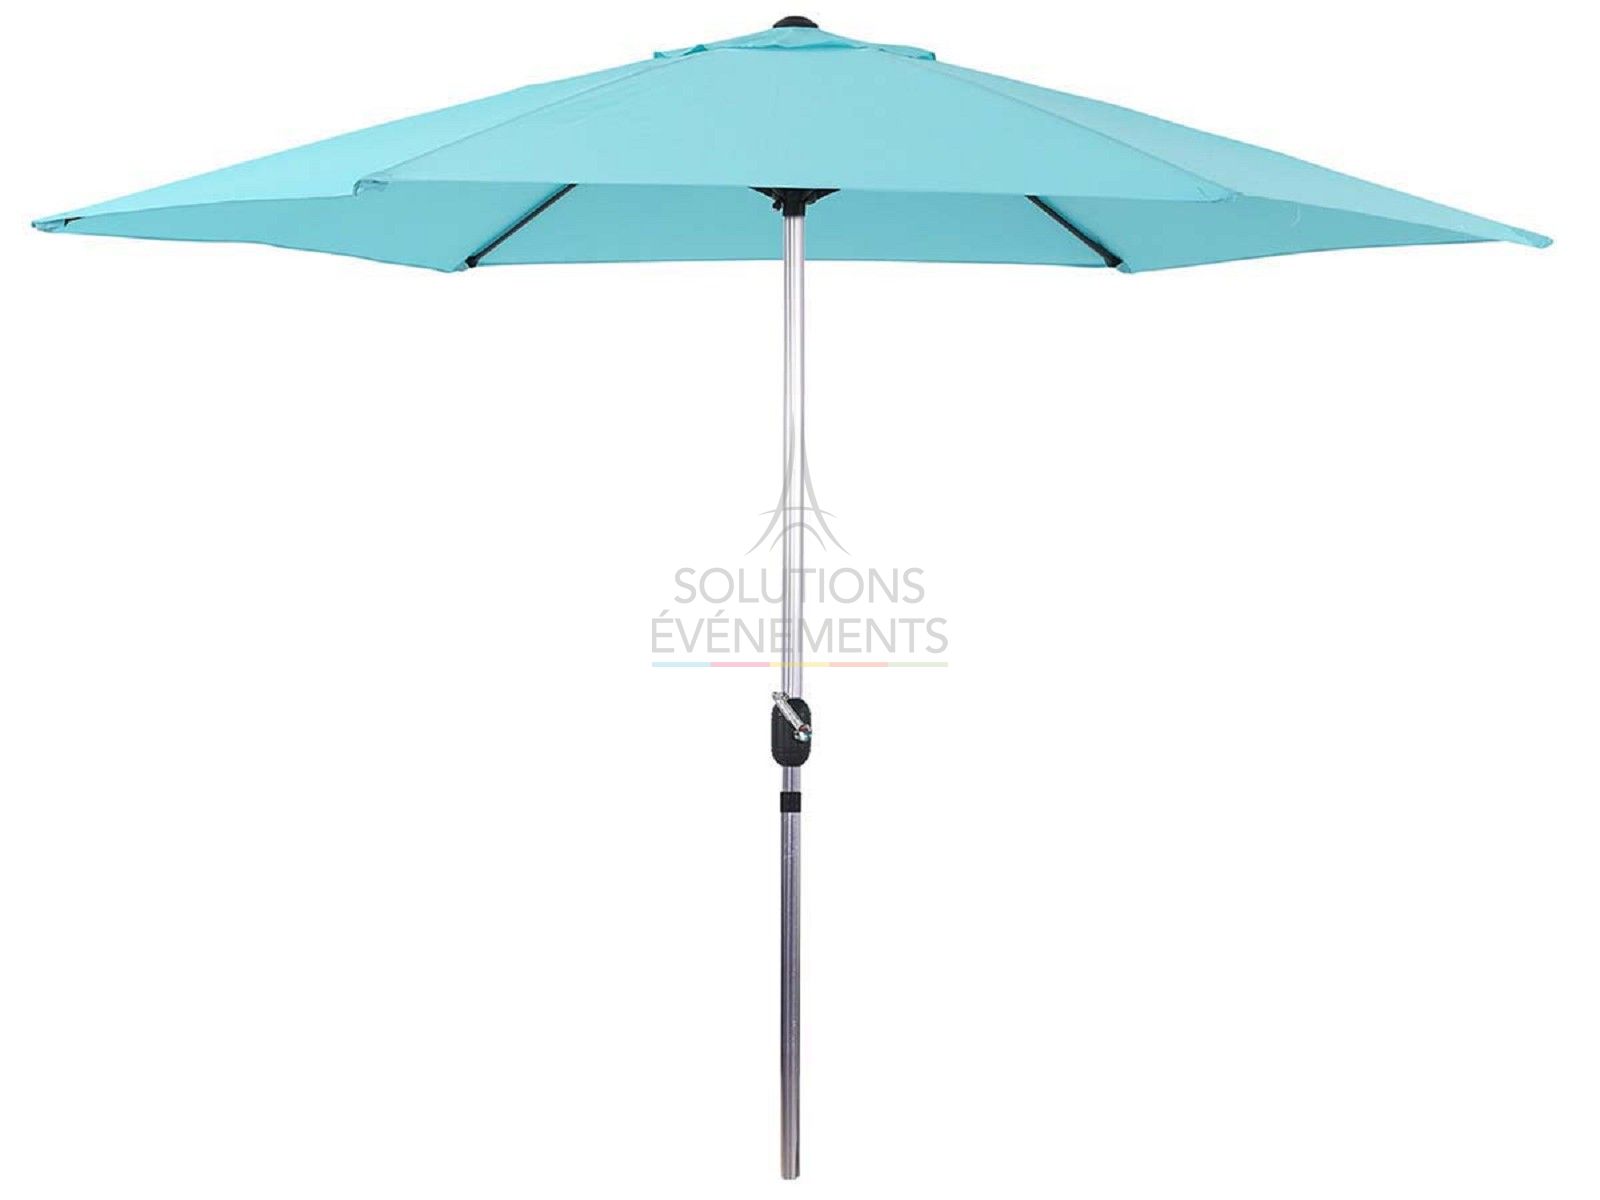 Rental of fabric parasols for gardens and terraces